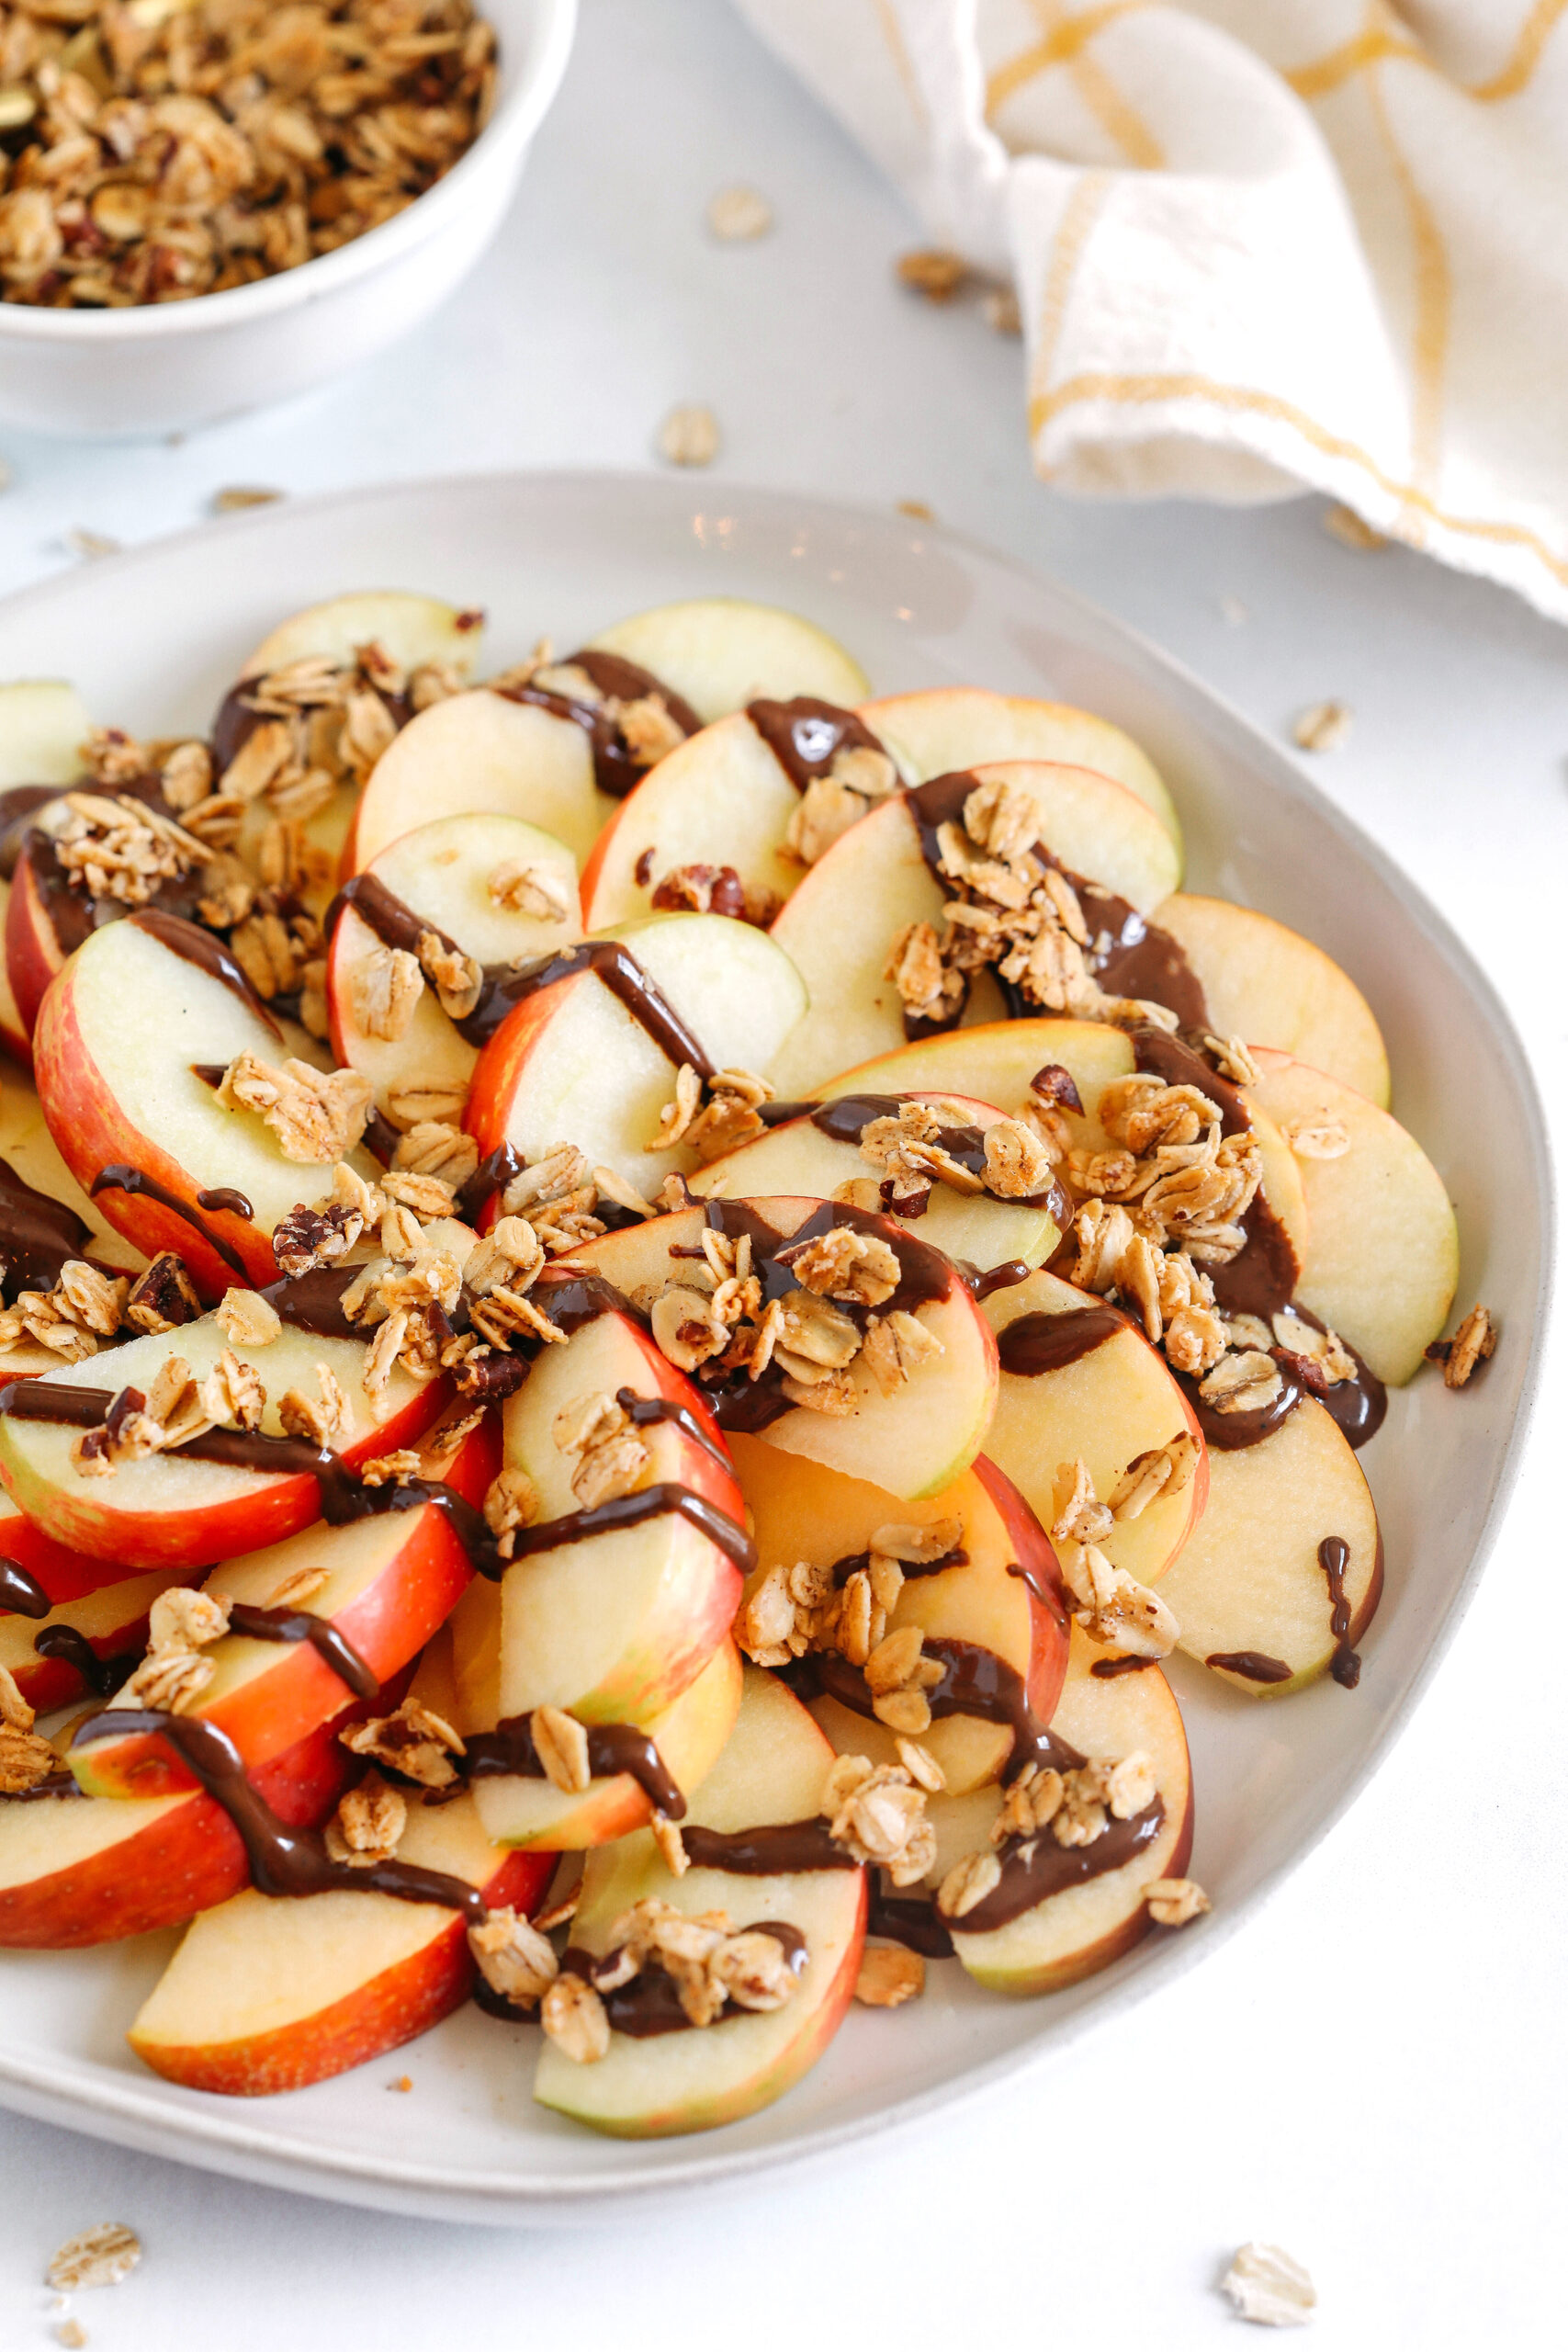 Delicious Chocolate Granola Apple Wedges easily made in just 10 minutes for the perfect after-school fall snack!  Sliced apples layered with melted chocolate and sprinkled with homemade granola!